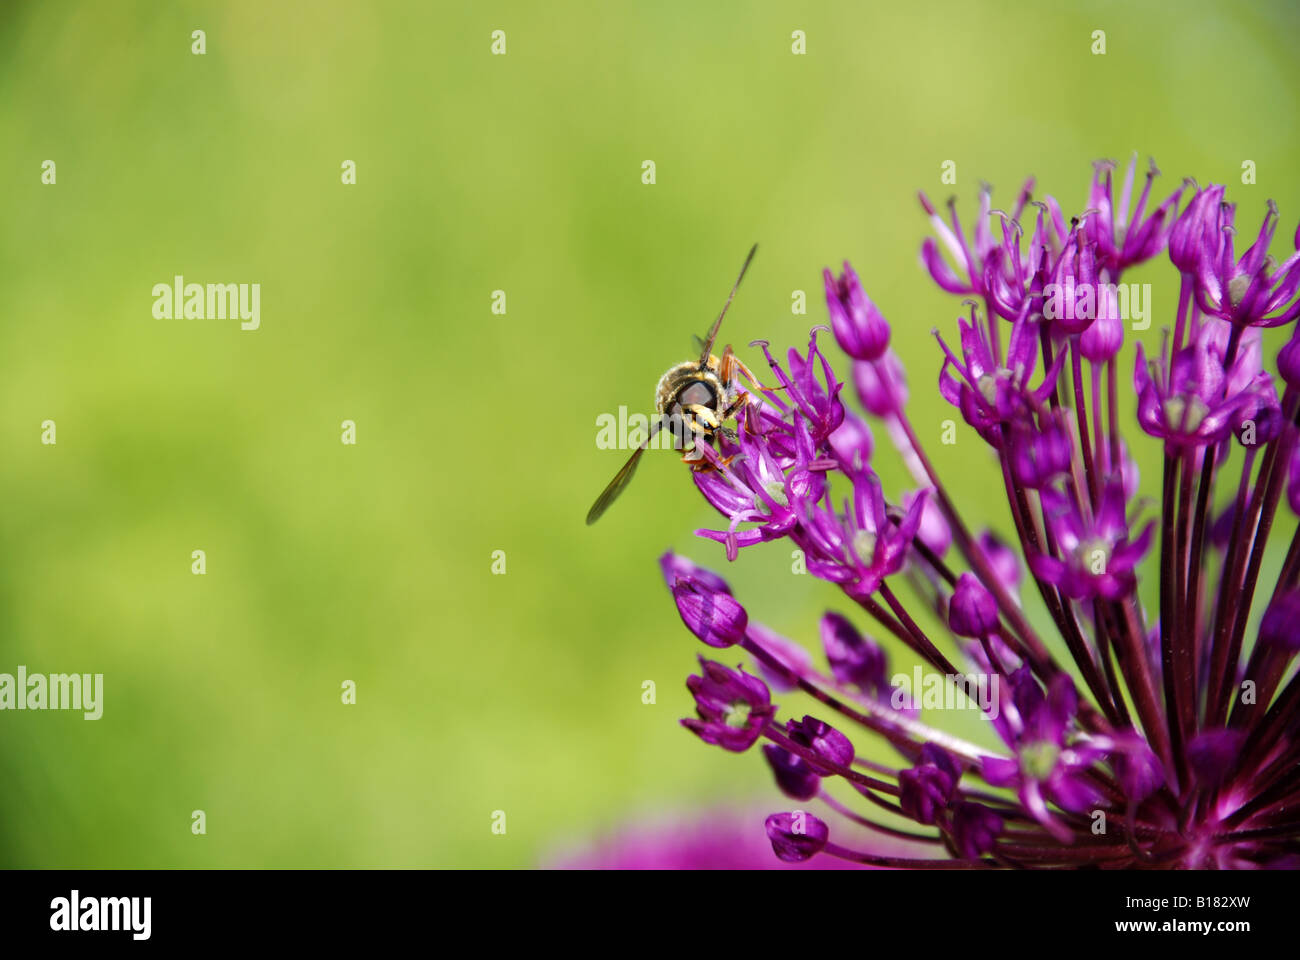 Syrphid fly sitting on a Flowering onion Stock Photo